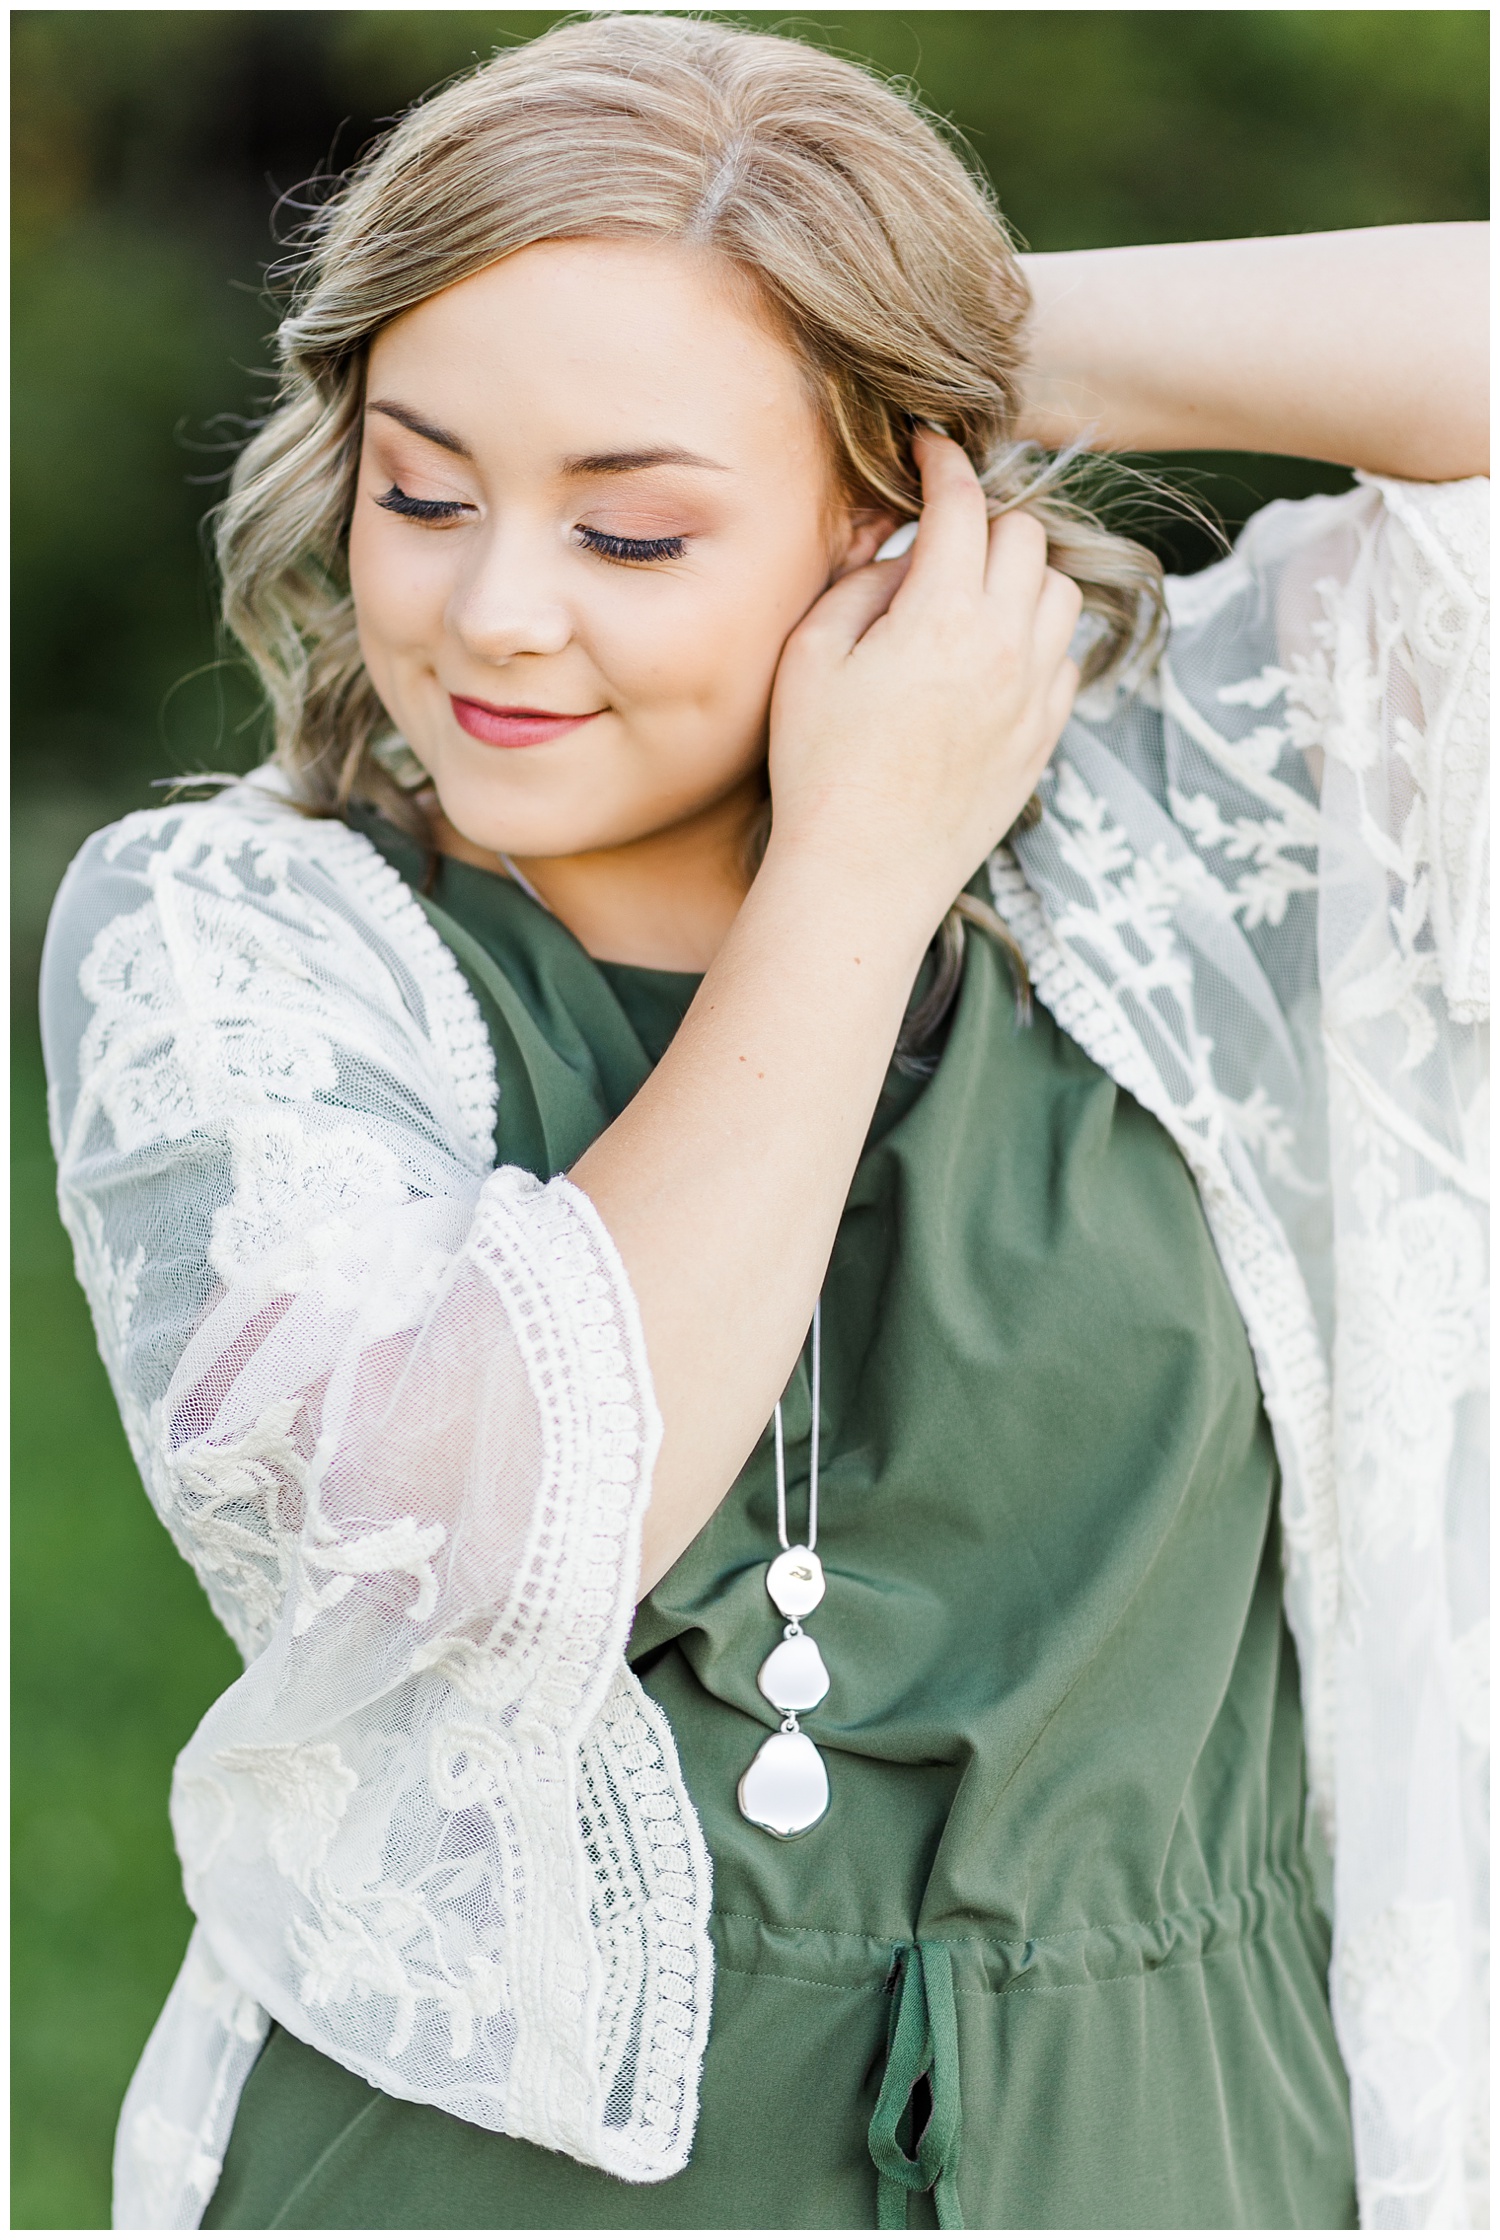 Cloey, wearing a green dress with a cream lace kimono, slowly tucks her hair behind her ear while looking down | CB Studio